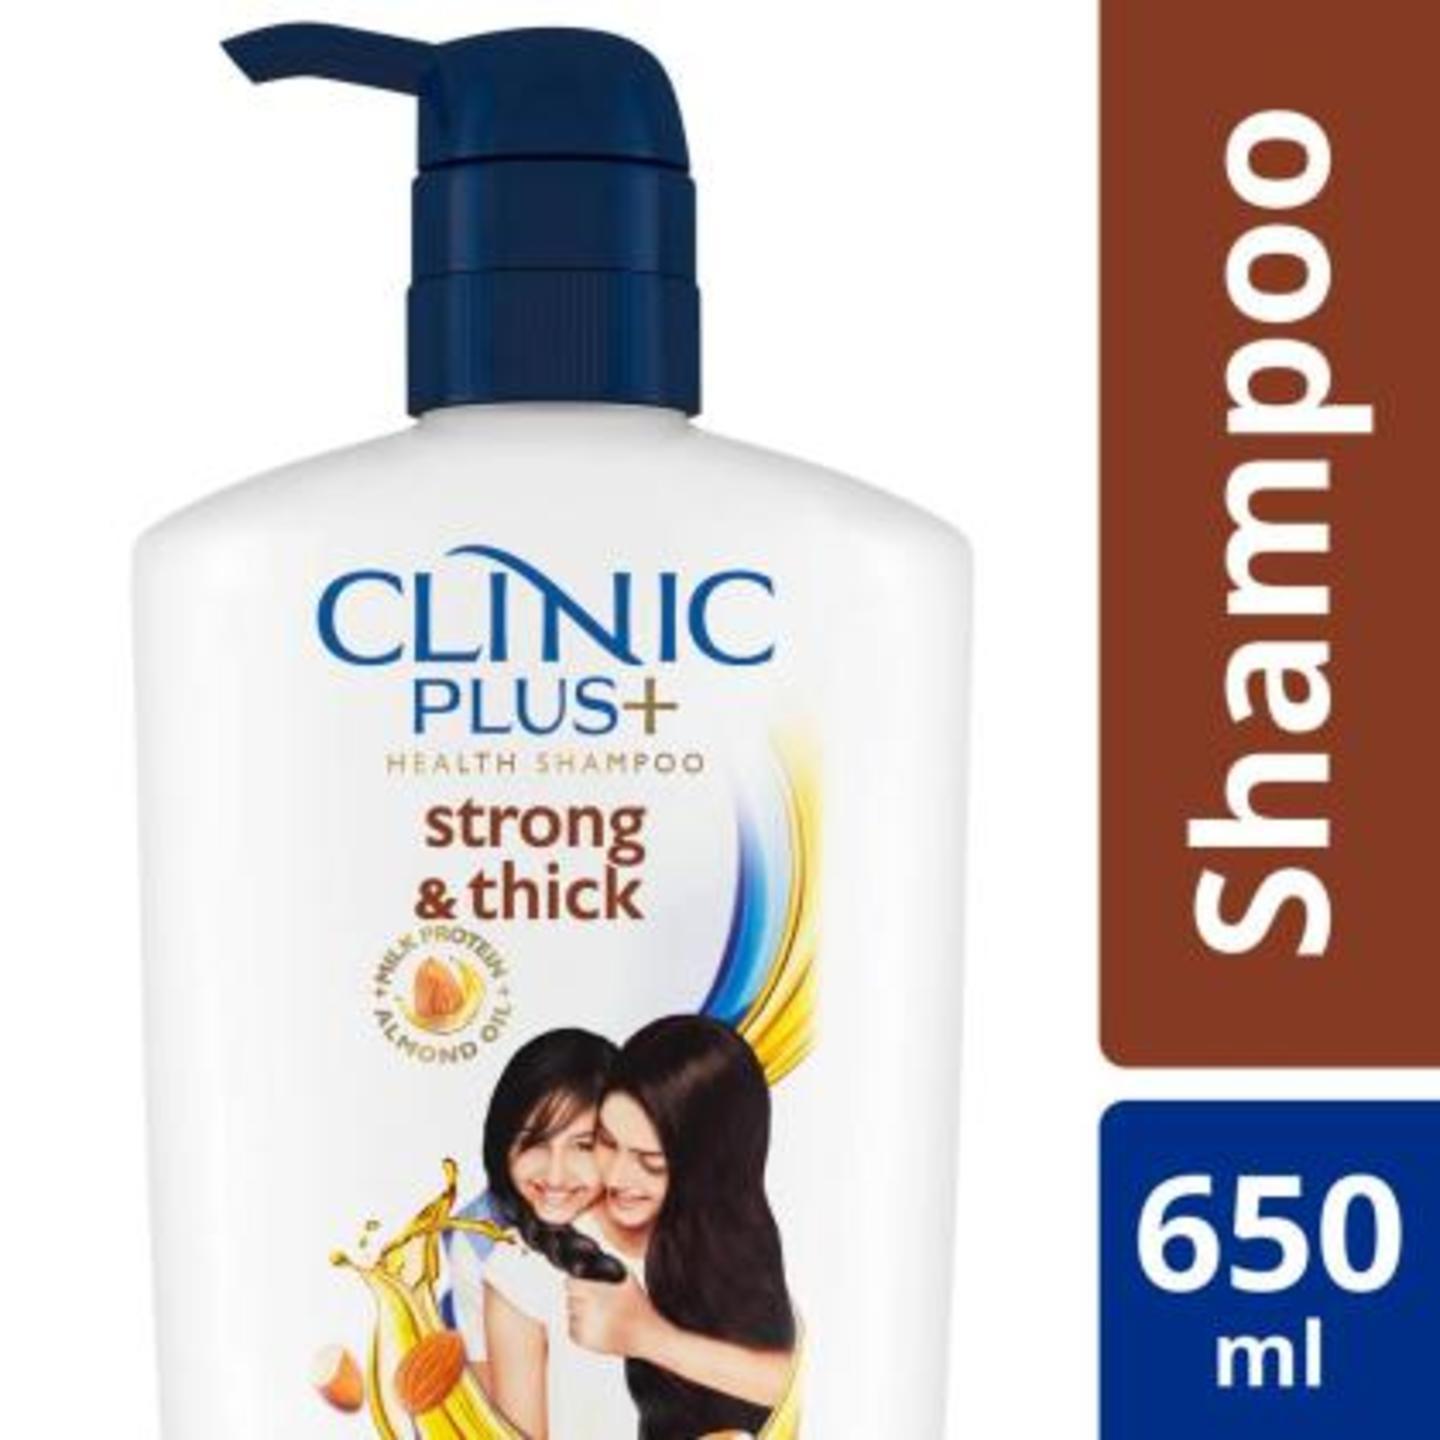 Clinic Plus Strong & Thick Health Almond Oil Shampoo 650 ml